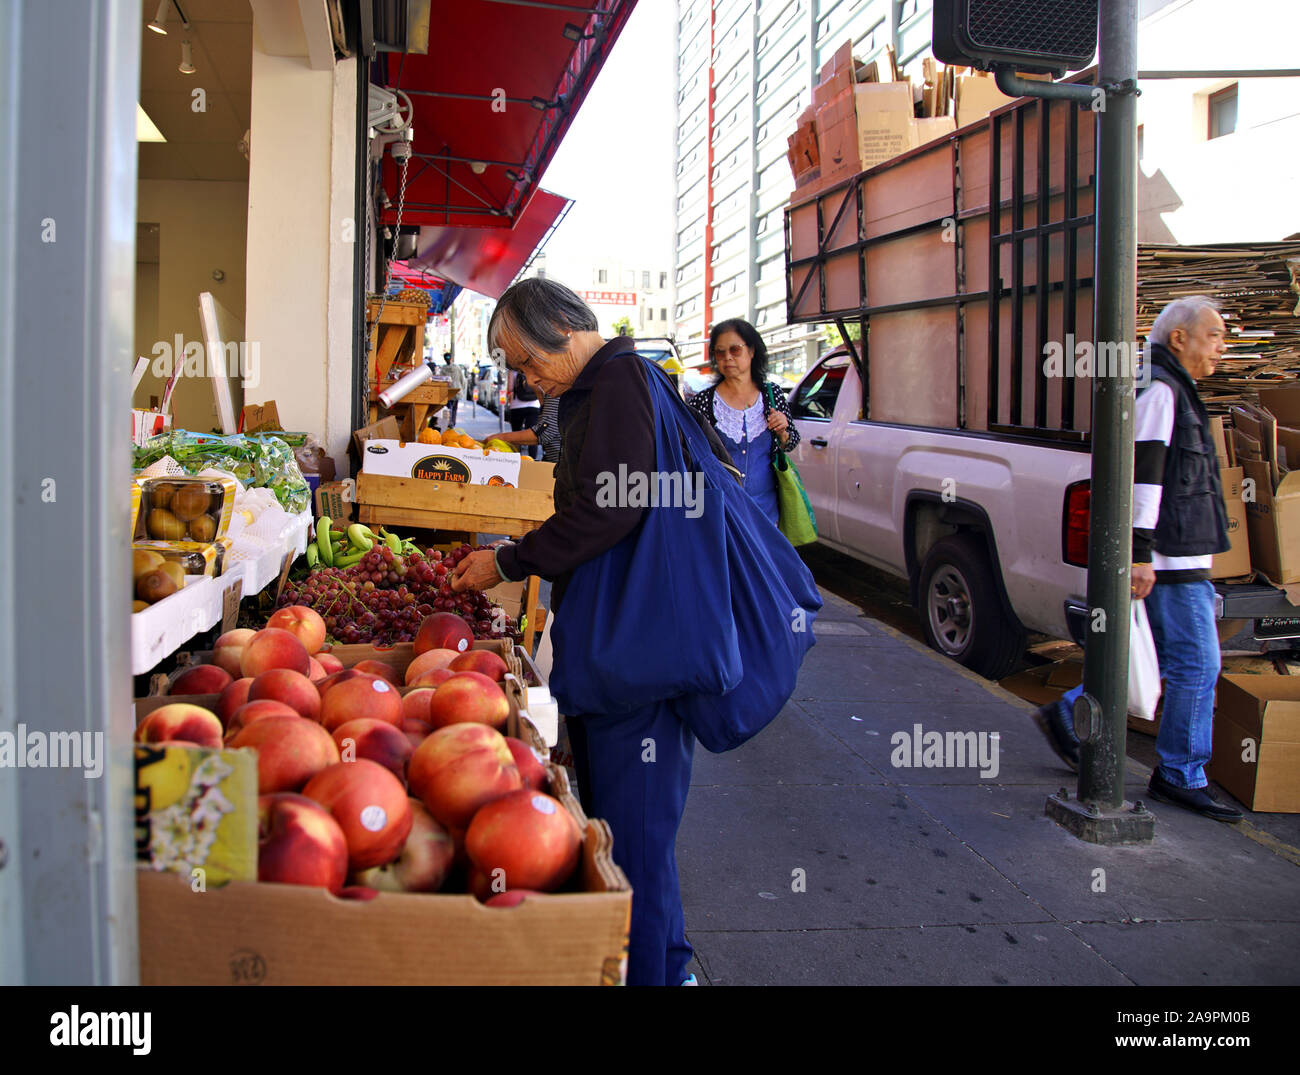 Shoppers at the street market in San Francisco's China Town going about their daily chores Stock Photo